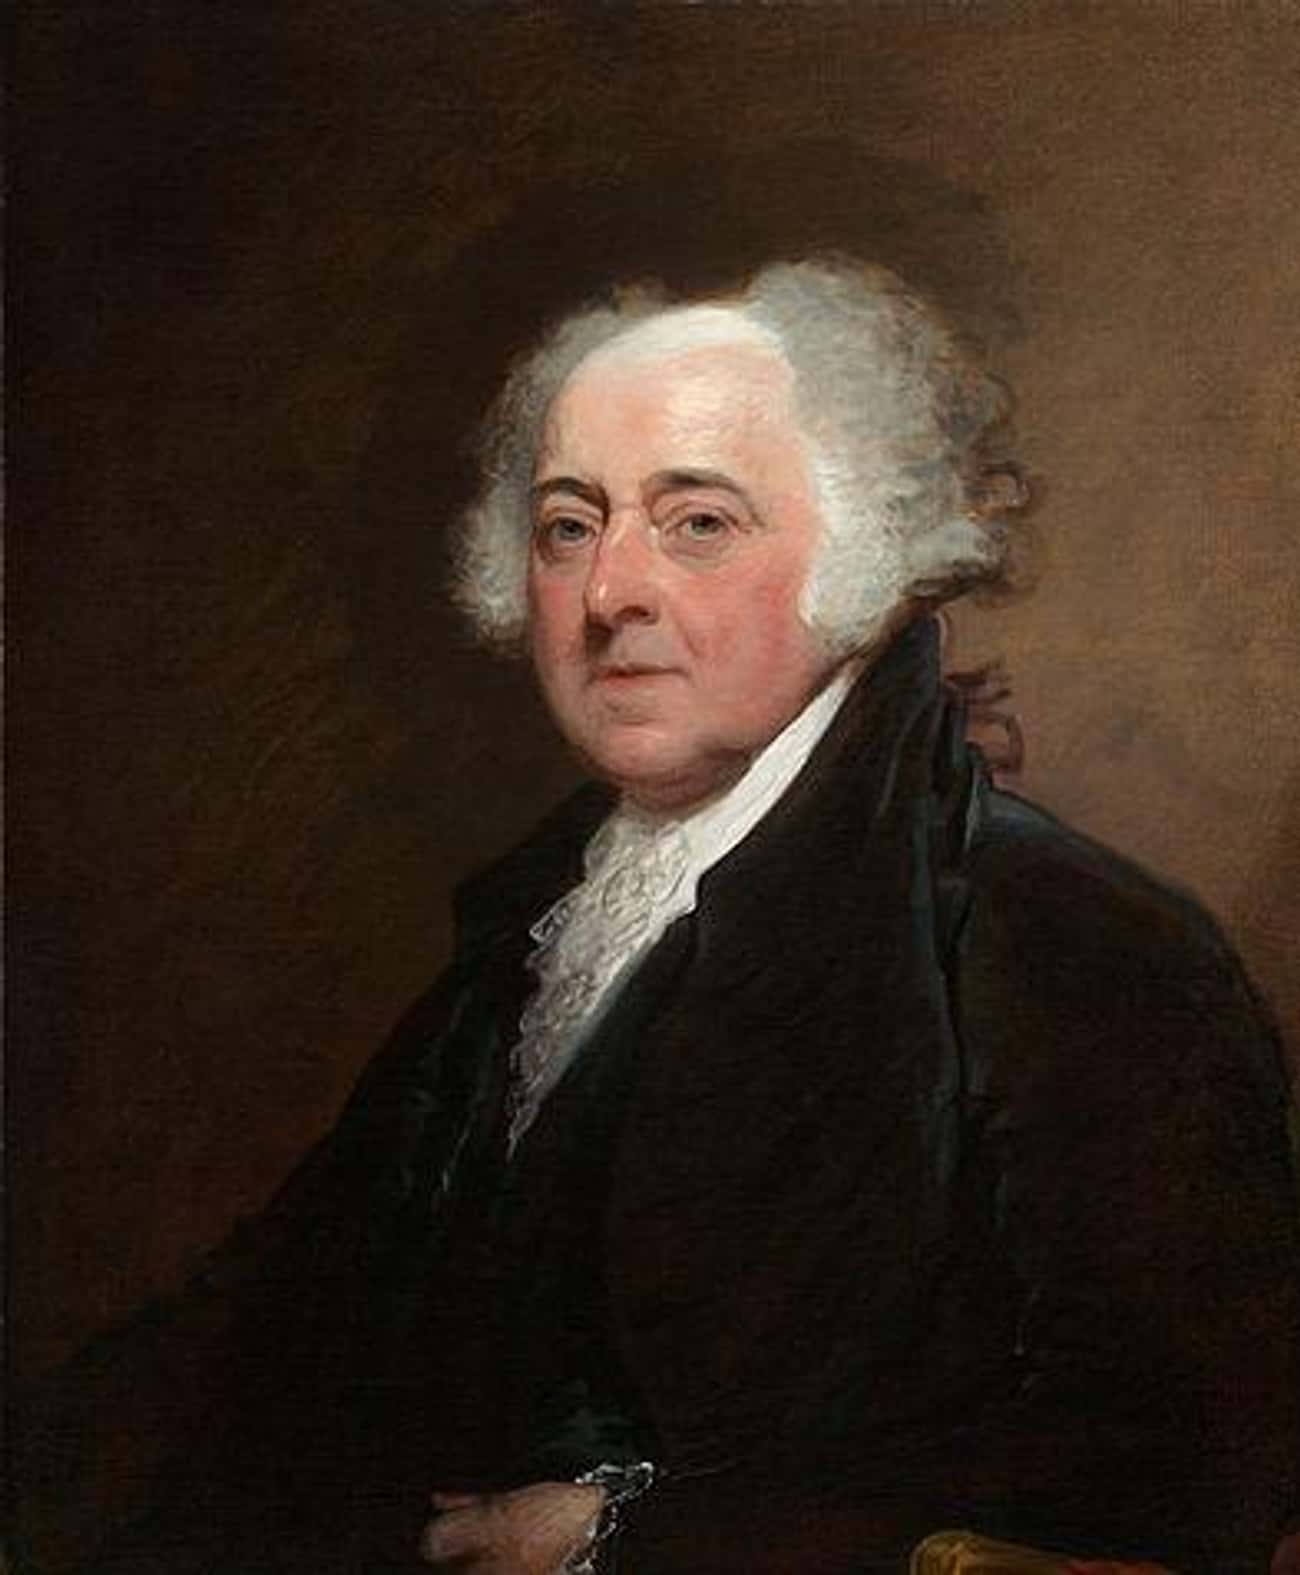 John Adams Thought Democracy Would Destroy The Country